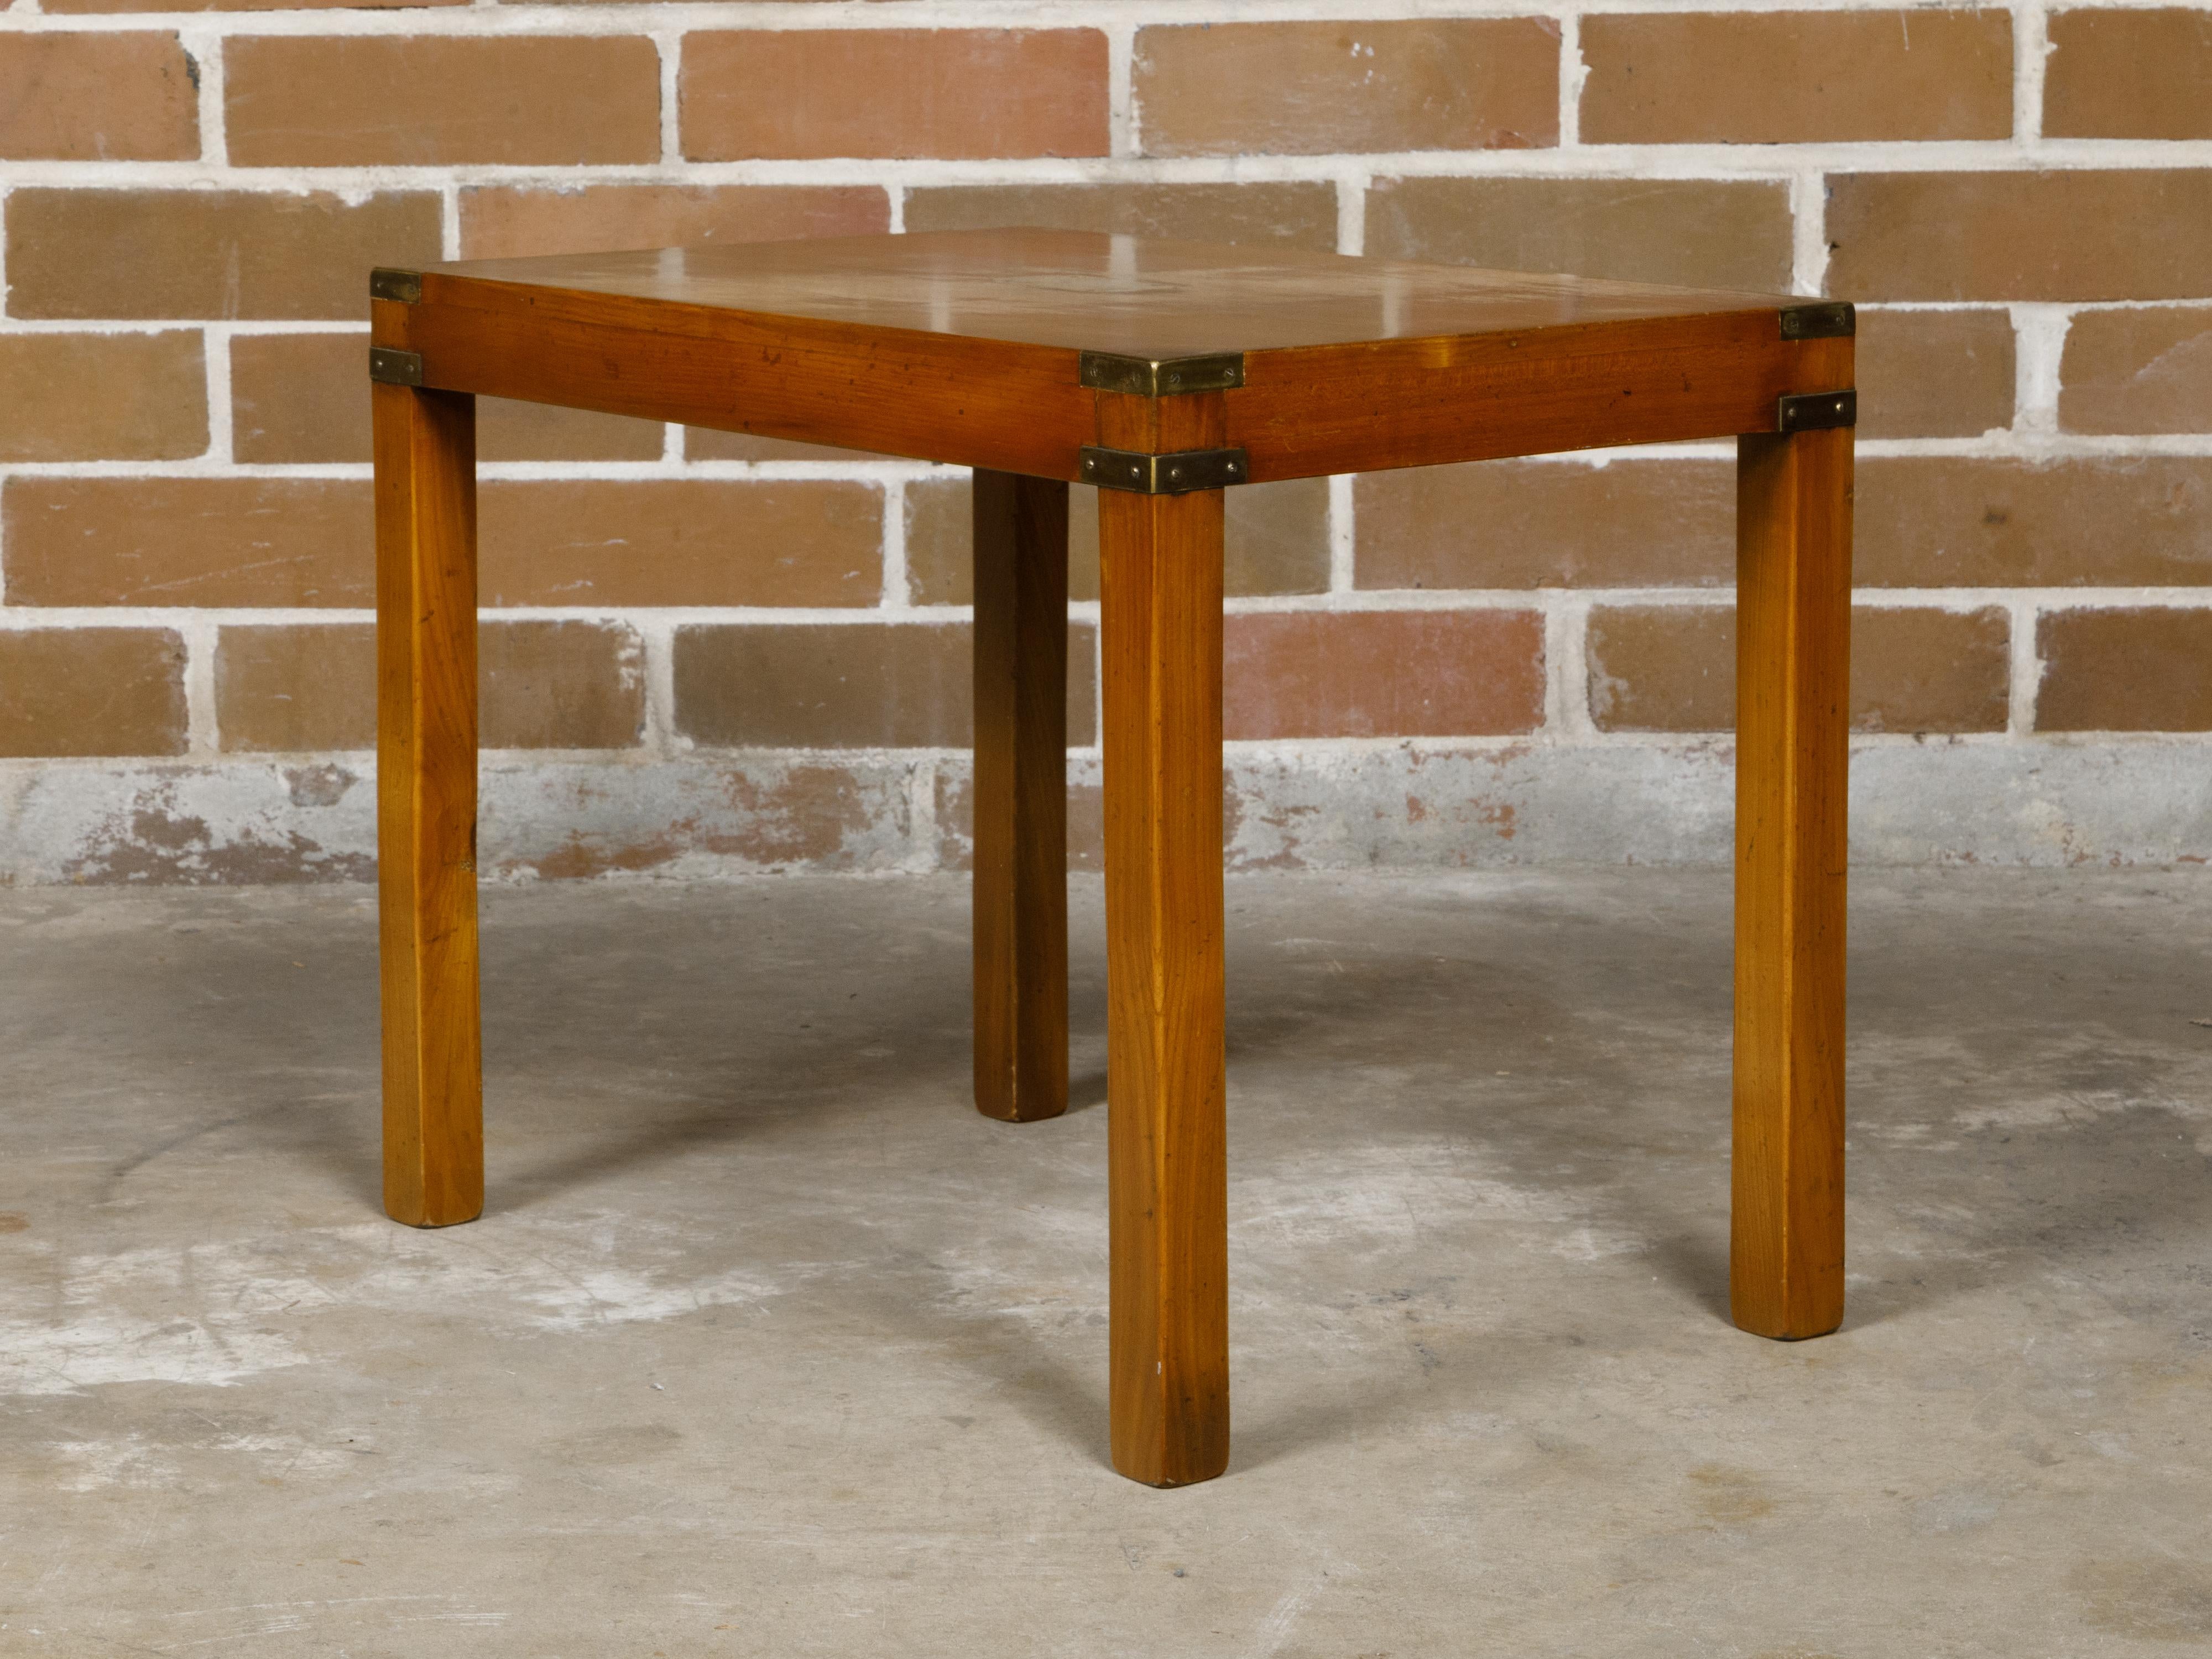 English Campaign Yew Wood 1920s Side Table with Brass Accents and Straight Legs For Sale 9